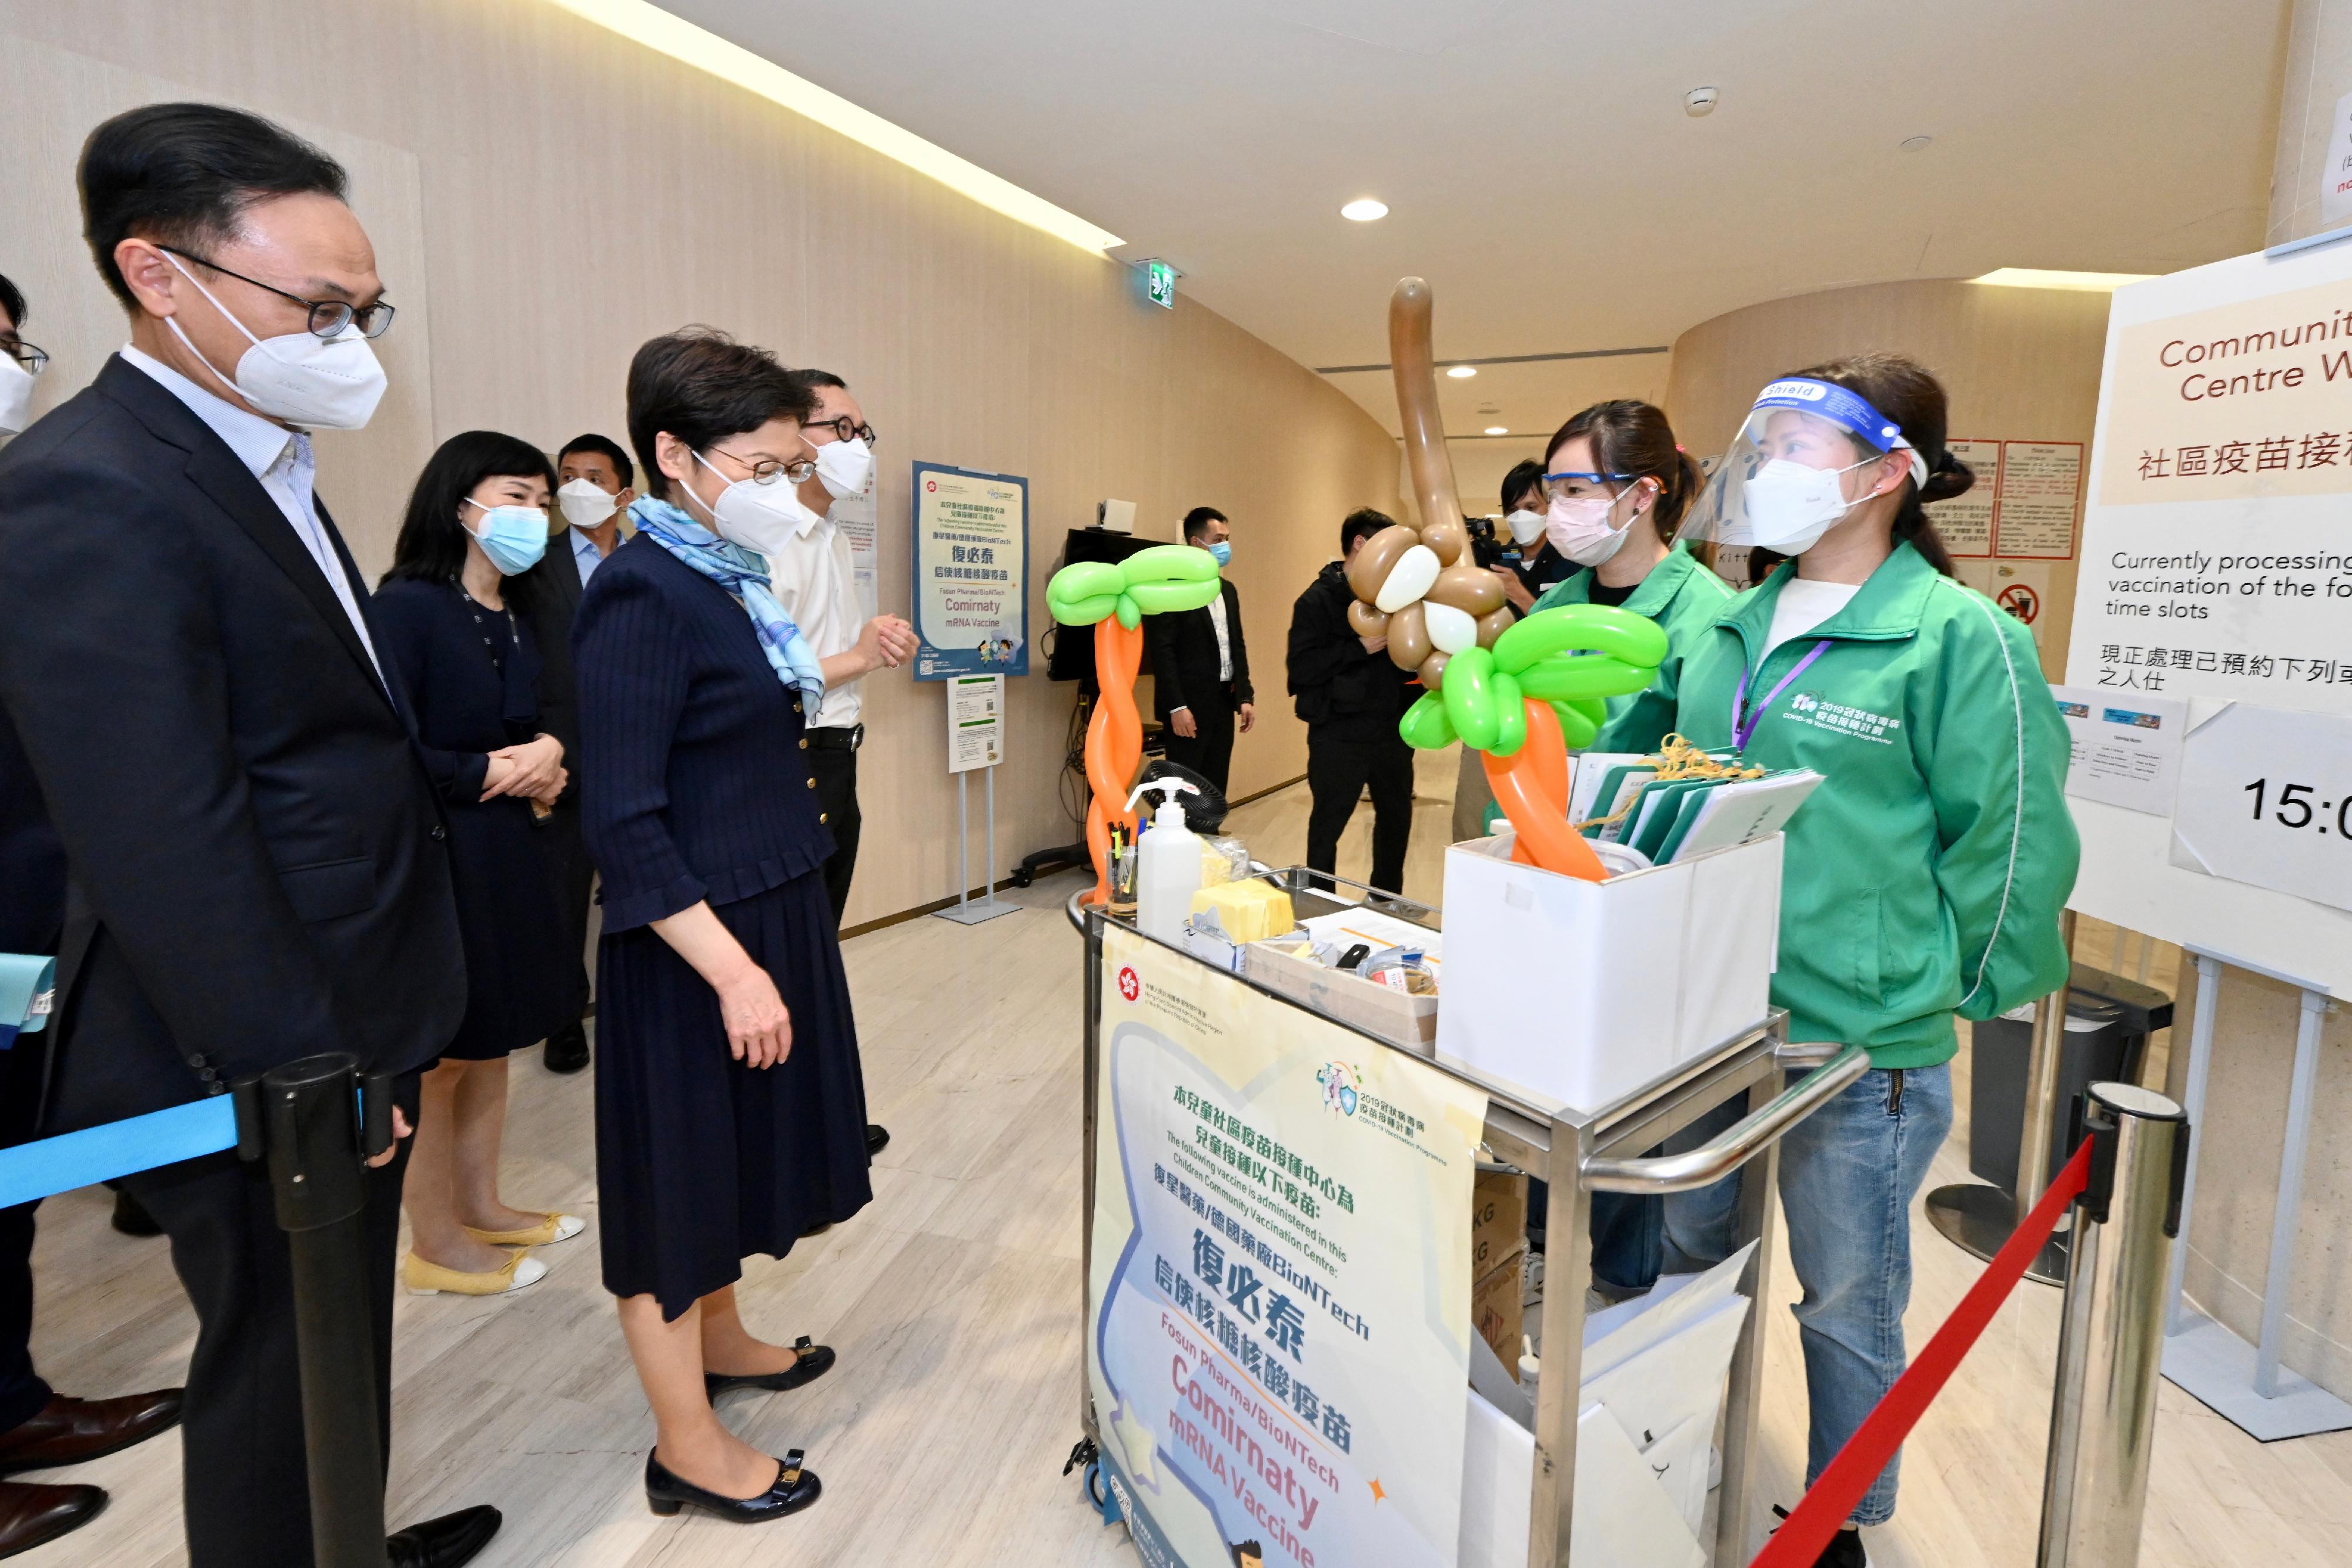 The Chief Executive, Mrs Carrie Lam (fourth left), visits the HKU Children Community Vaccination Centre at Gleneagles Hospital Hong Kong today (March 18). Looking on is the Secretary for the Civil Service, Mr Patrick Nip (first left).